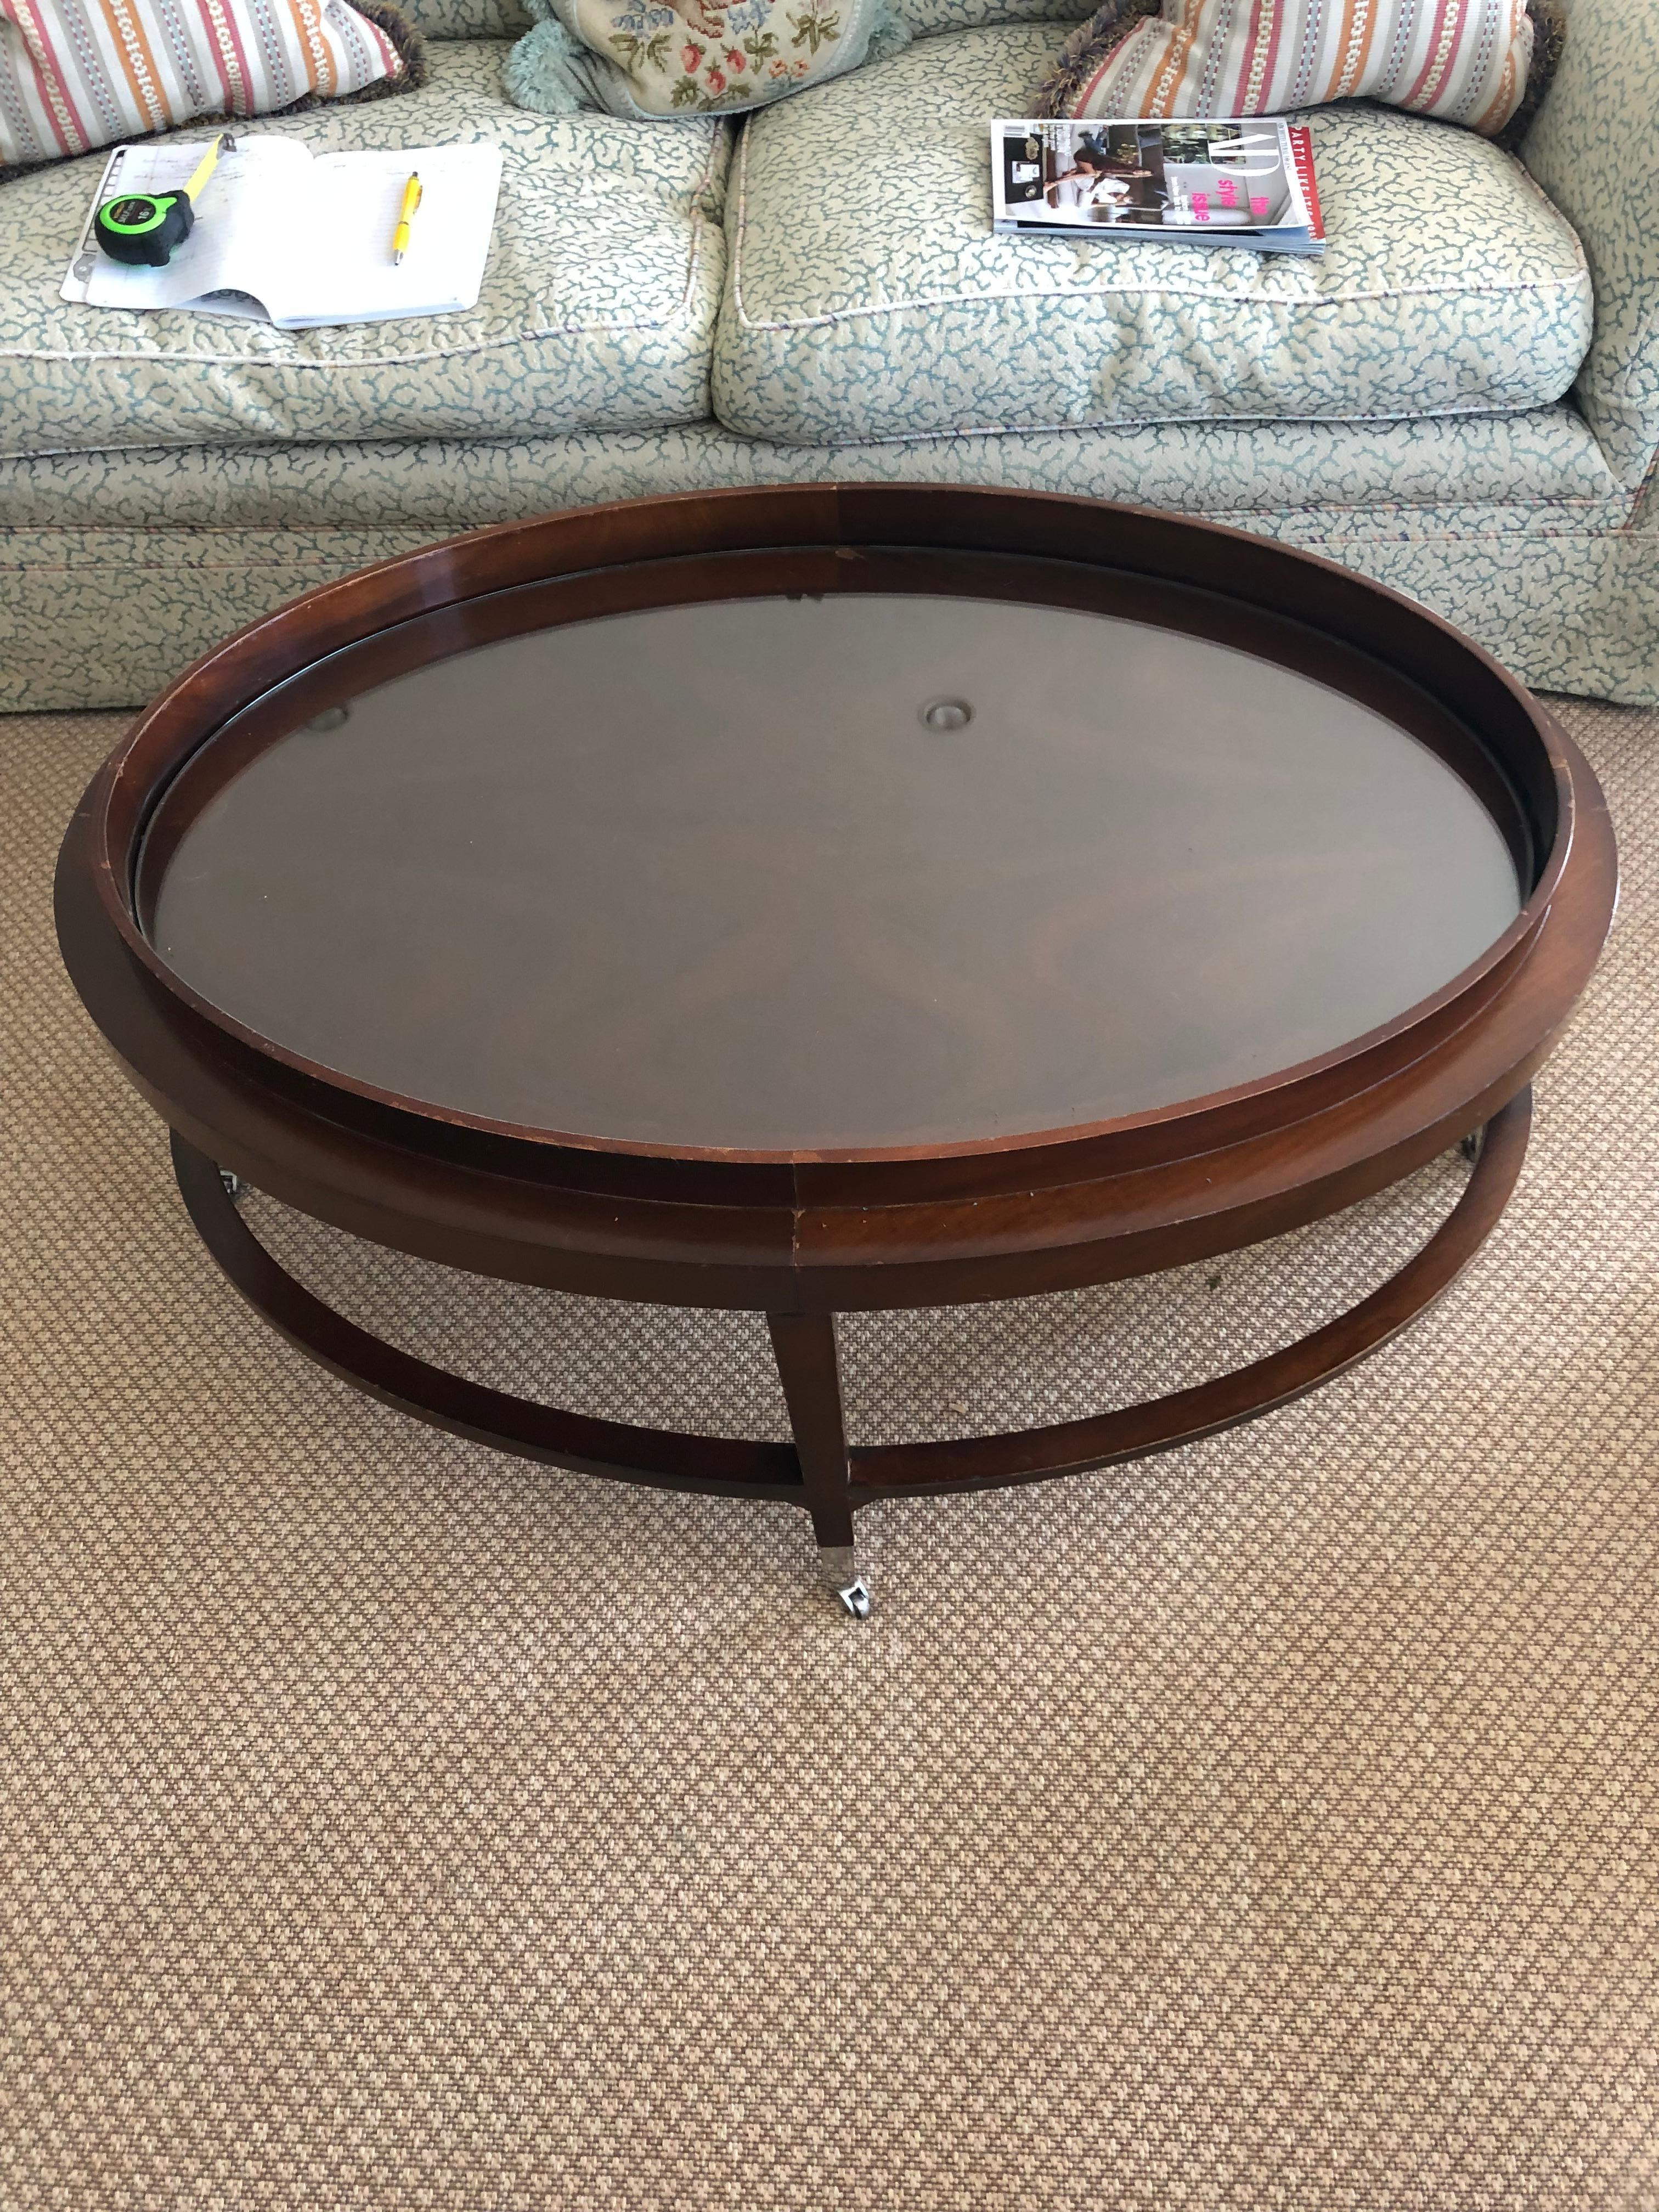 A great looking oval coffee table in a terrific size having glass inset in mahogany table terminating with nickel casters.